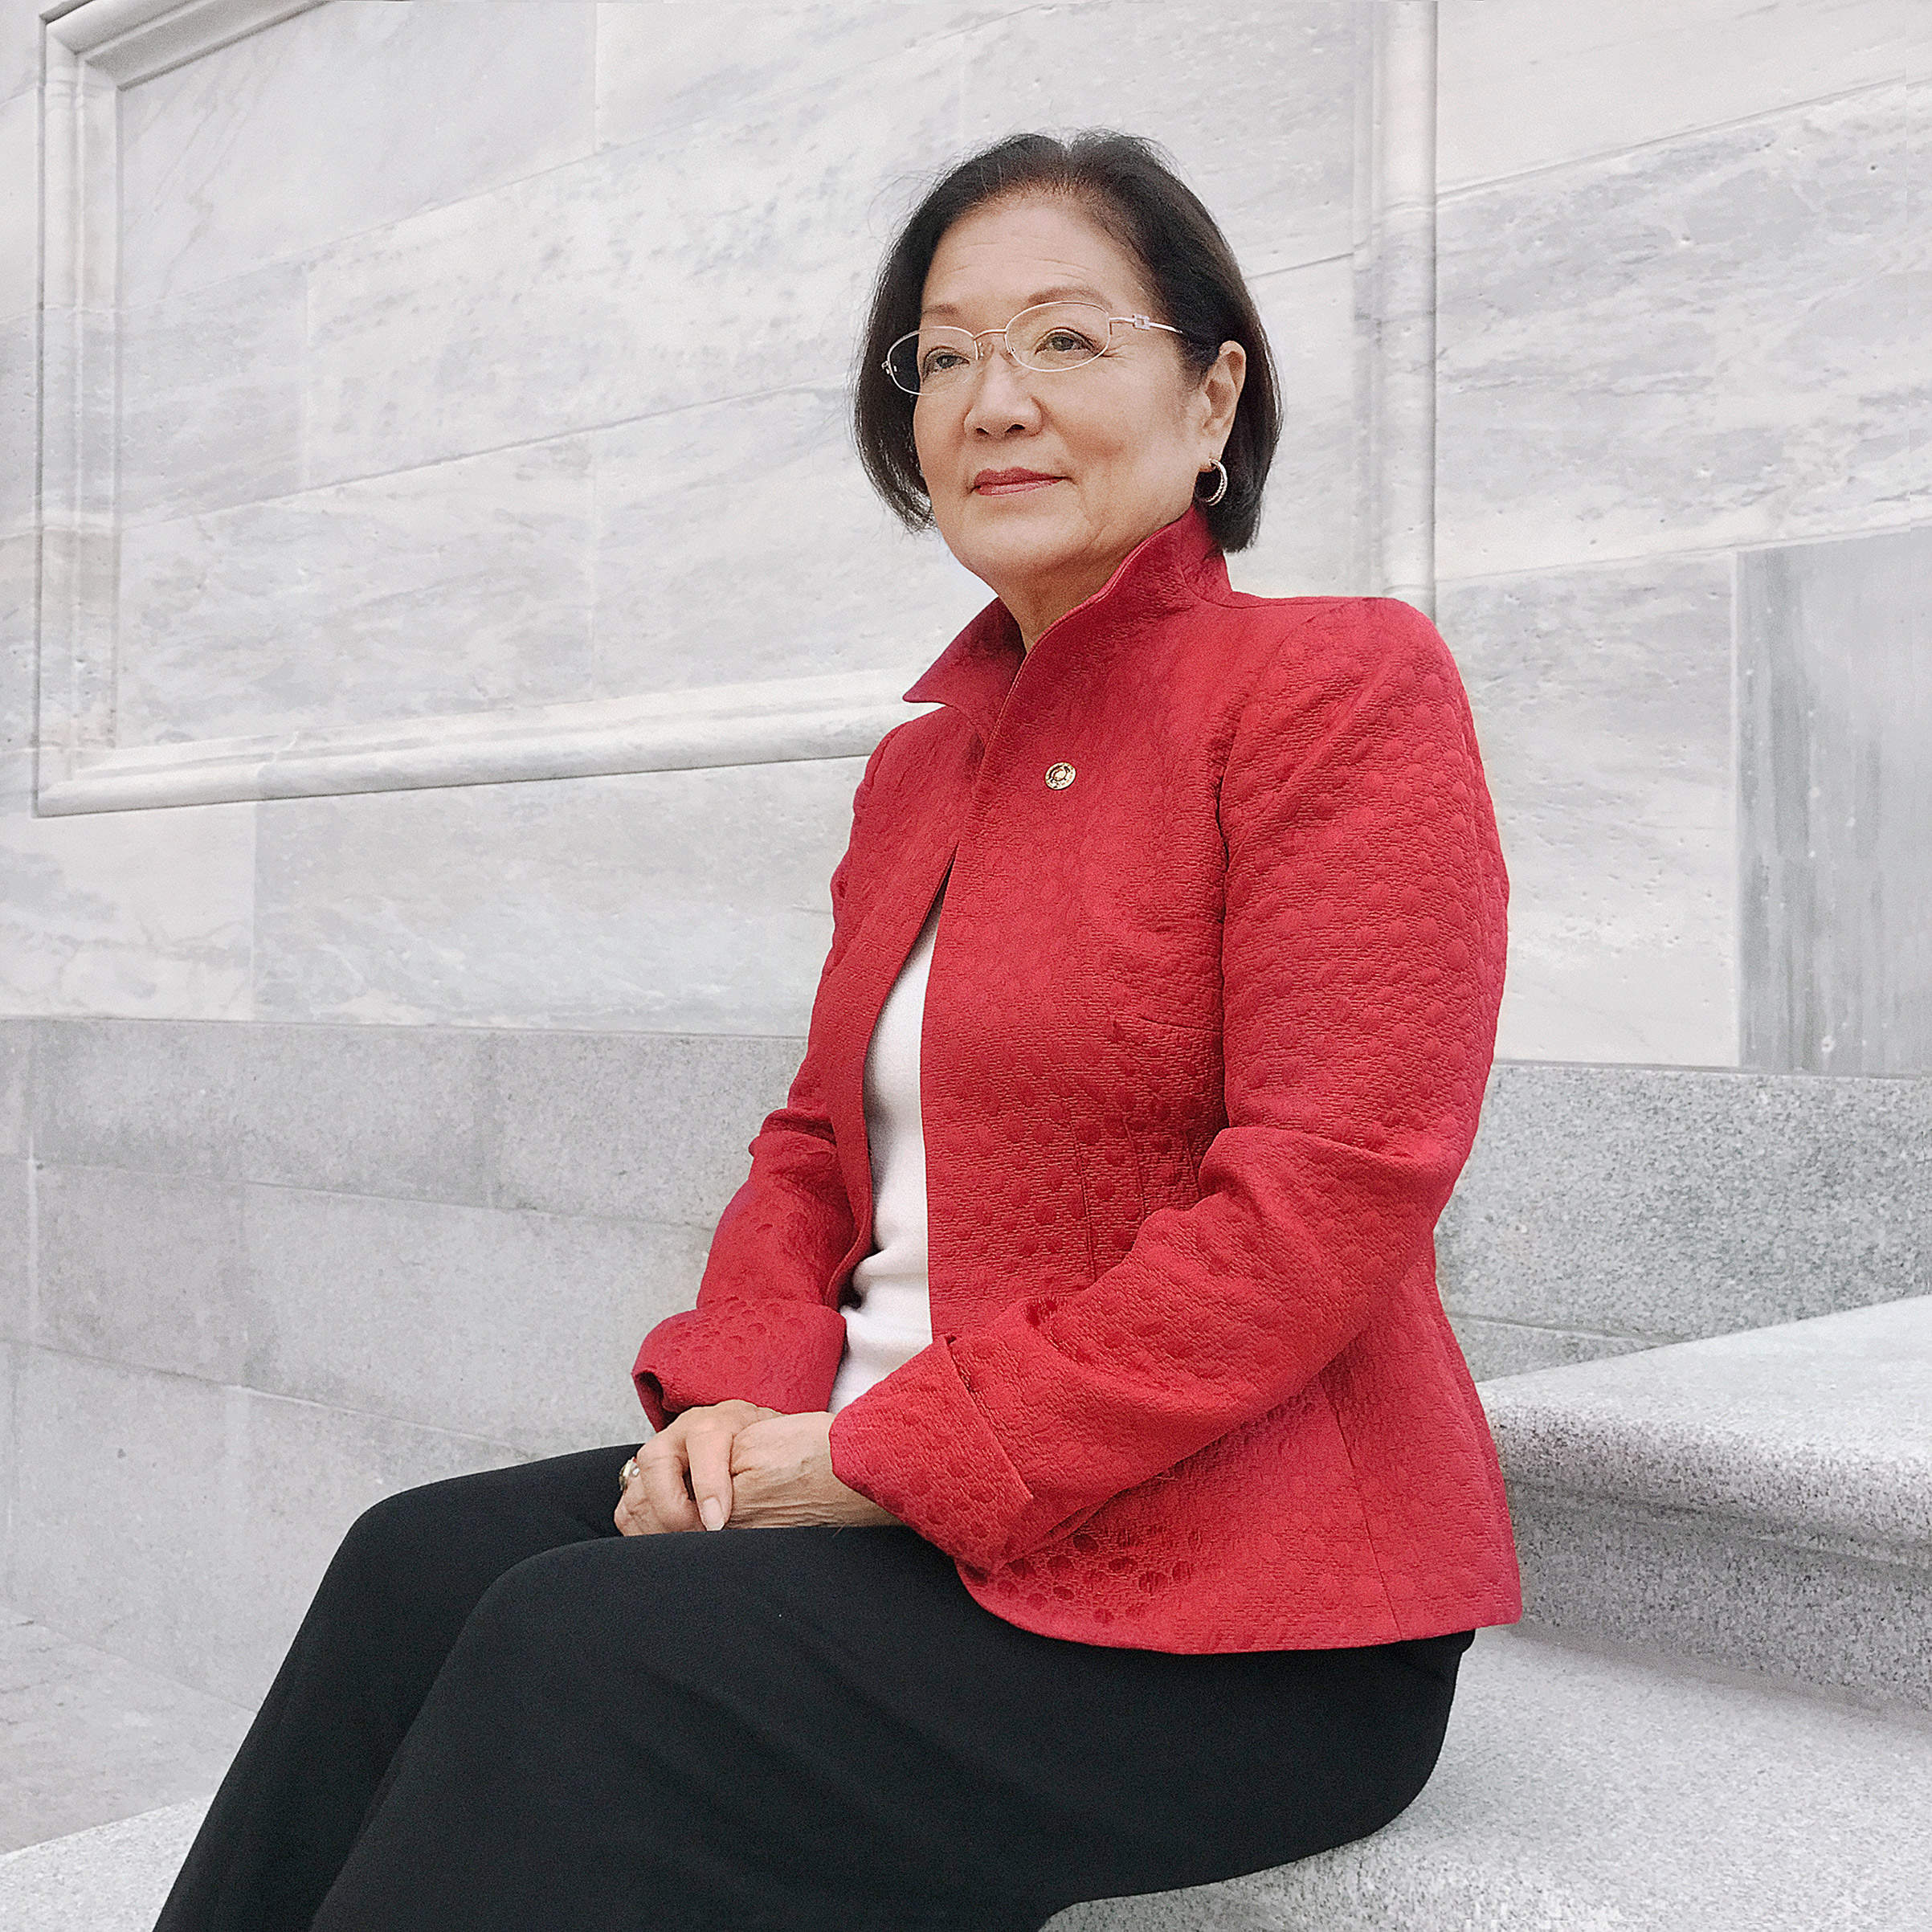 Portrait of Senator Mazie Hirono, photographed on the steps of The Capitol, Washington, D.C., October 6, 2016. (Photograph by Luisa Dörr for TIME)